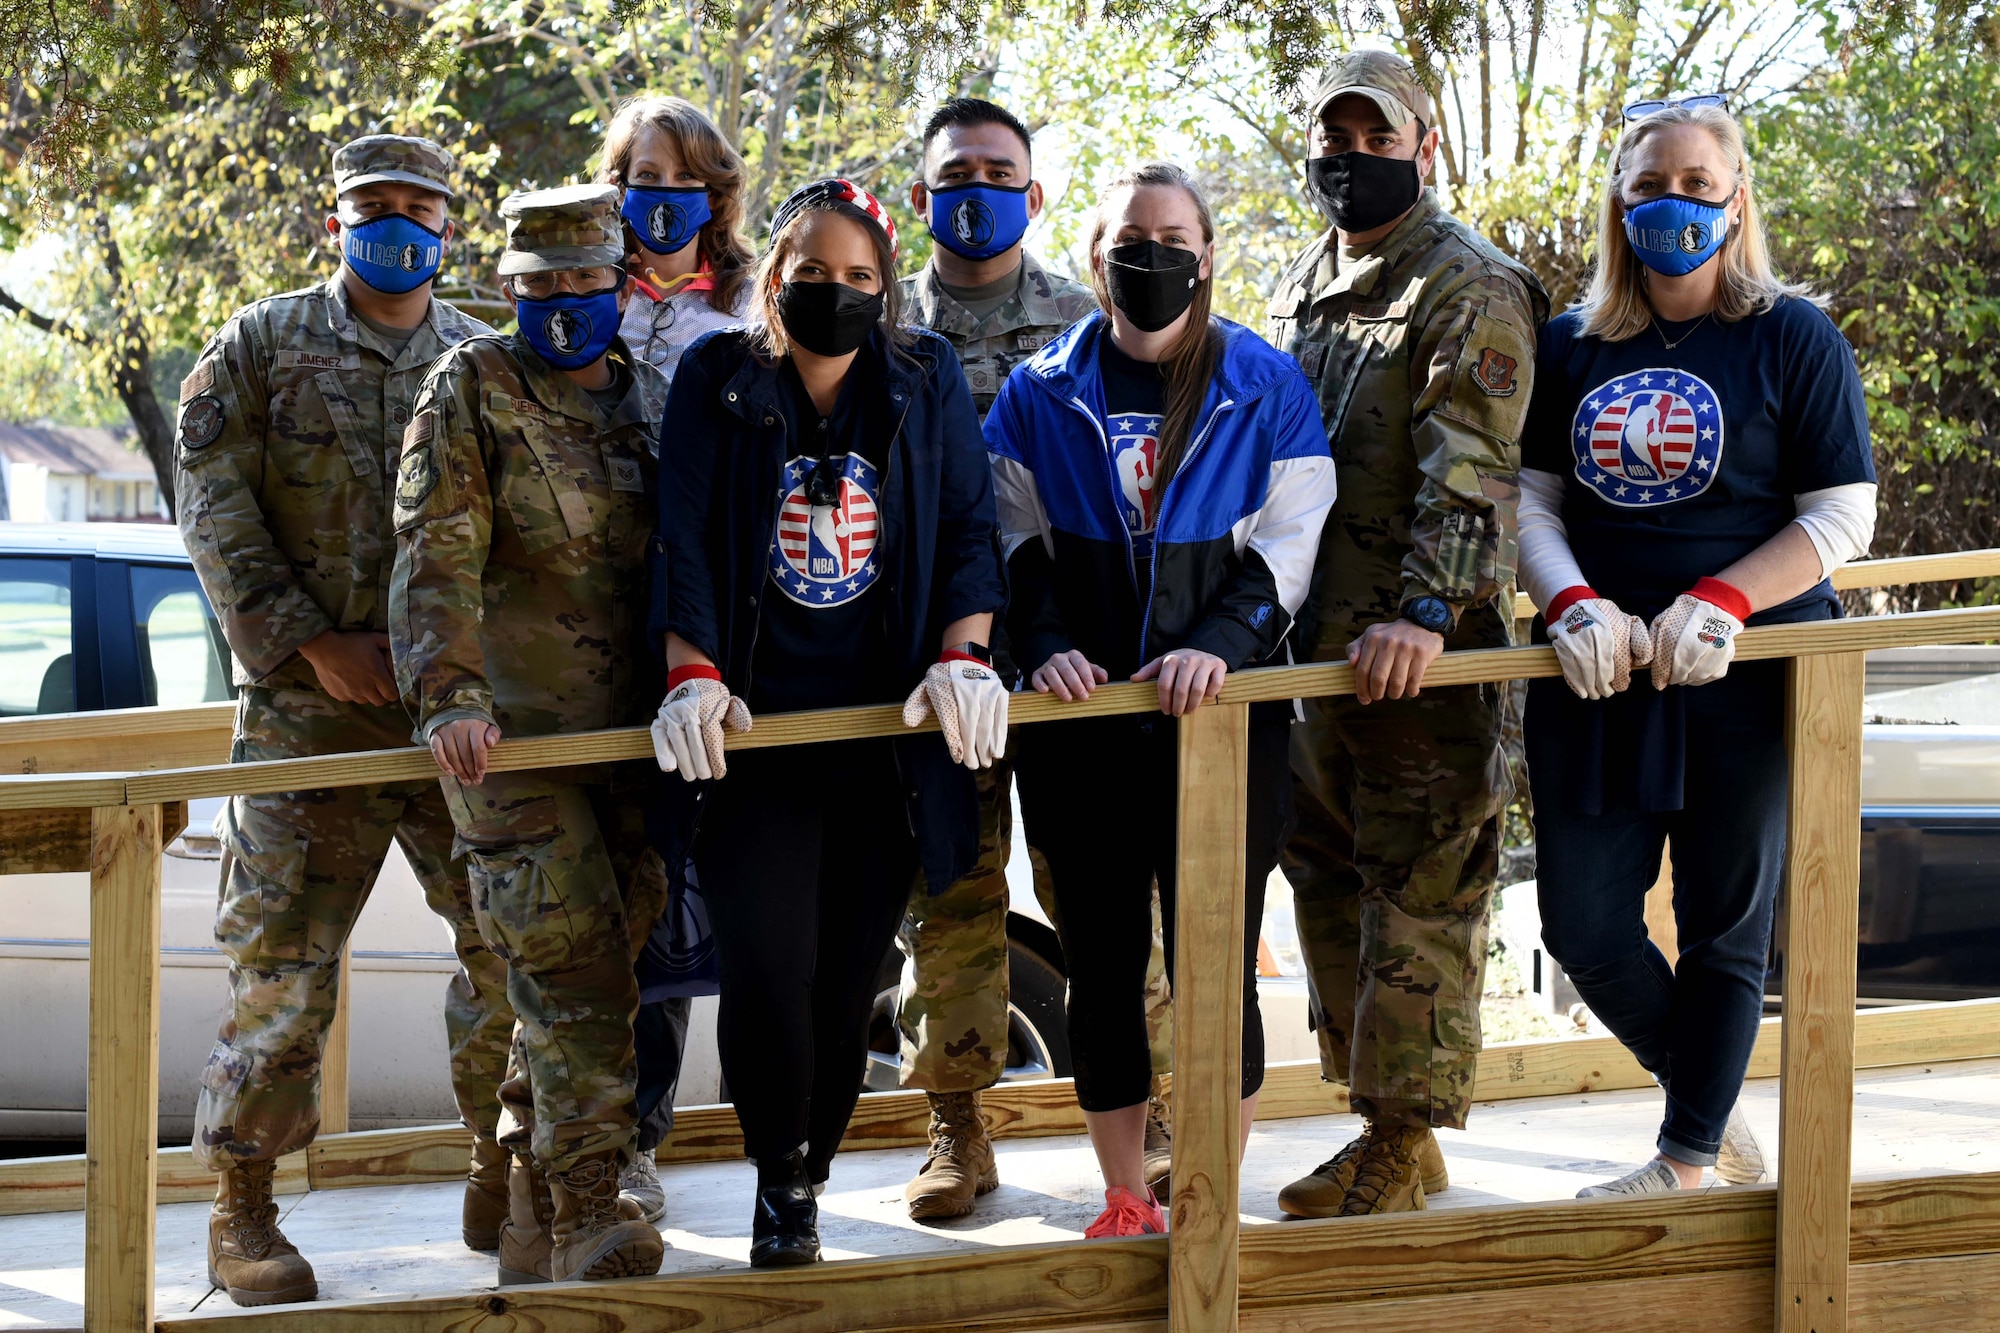 Volunteers from 301st Fighter Wing, Dallas Mavericks, and The Texas Ramp Project stand on a new ramp during a Hoops for Troops event in Dallas, Texas on November 6, 2020. The volunteers helped The Texas Ramp Project install two ramps for two homebound, low income families in Dallas. (U.S. Air Force photo by Staff Sgt. Randall Moose)